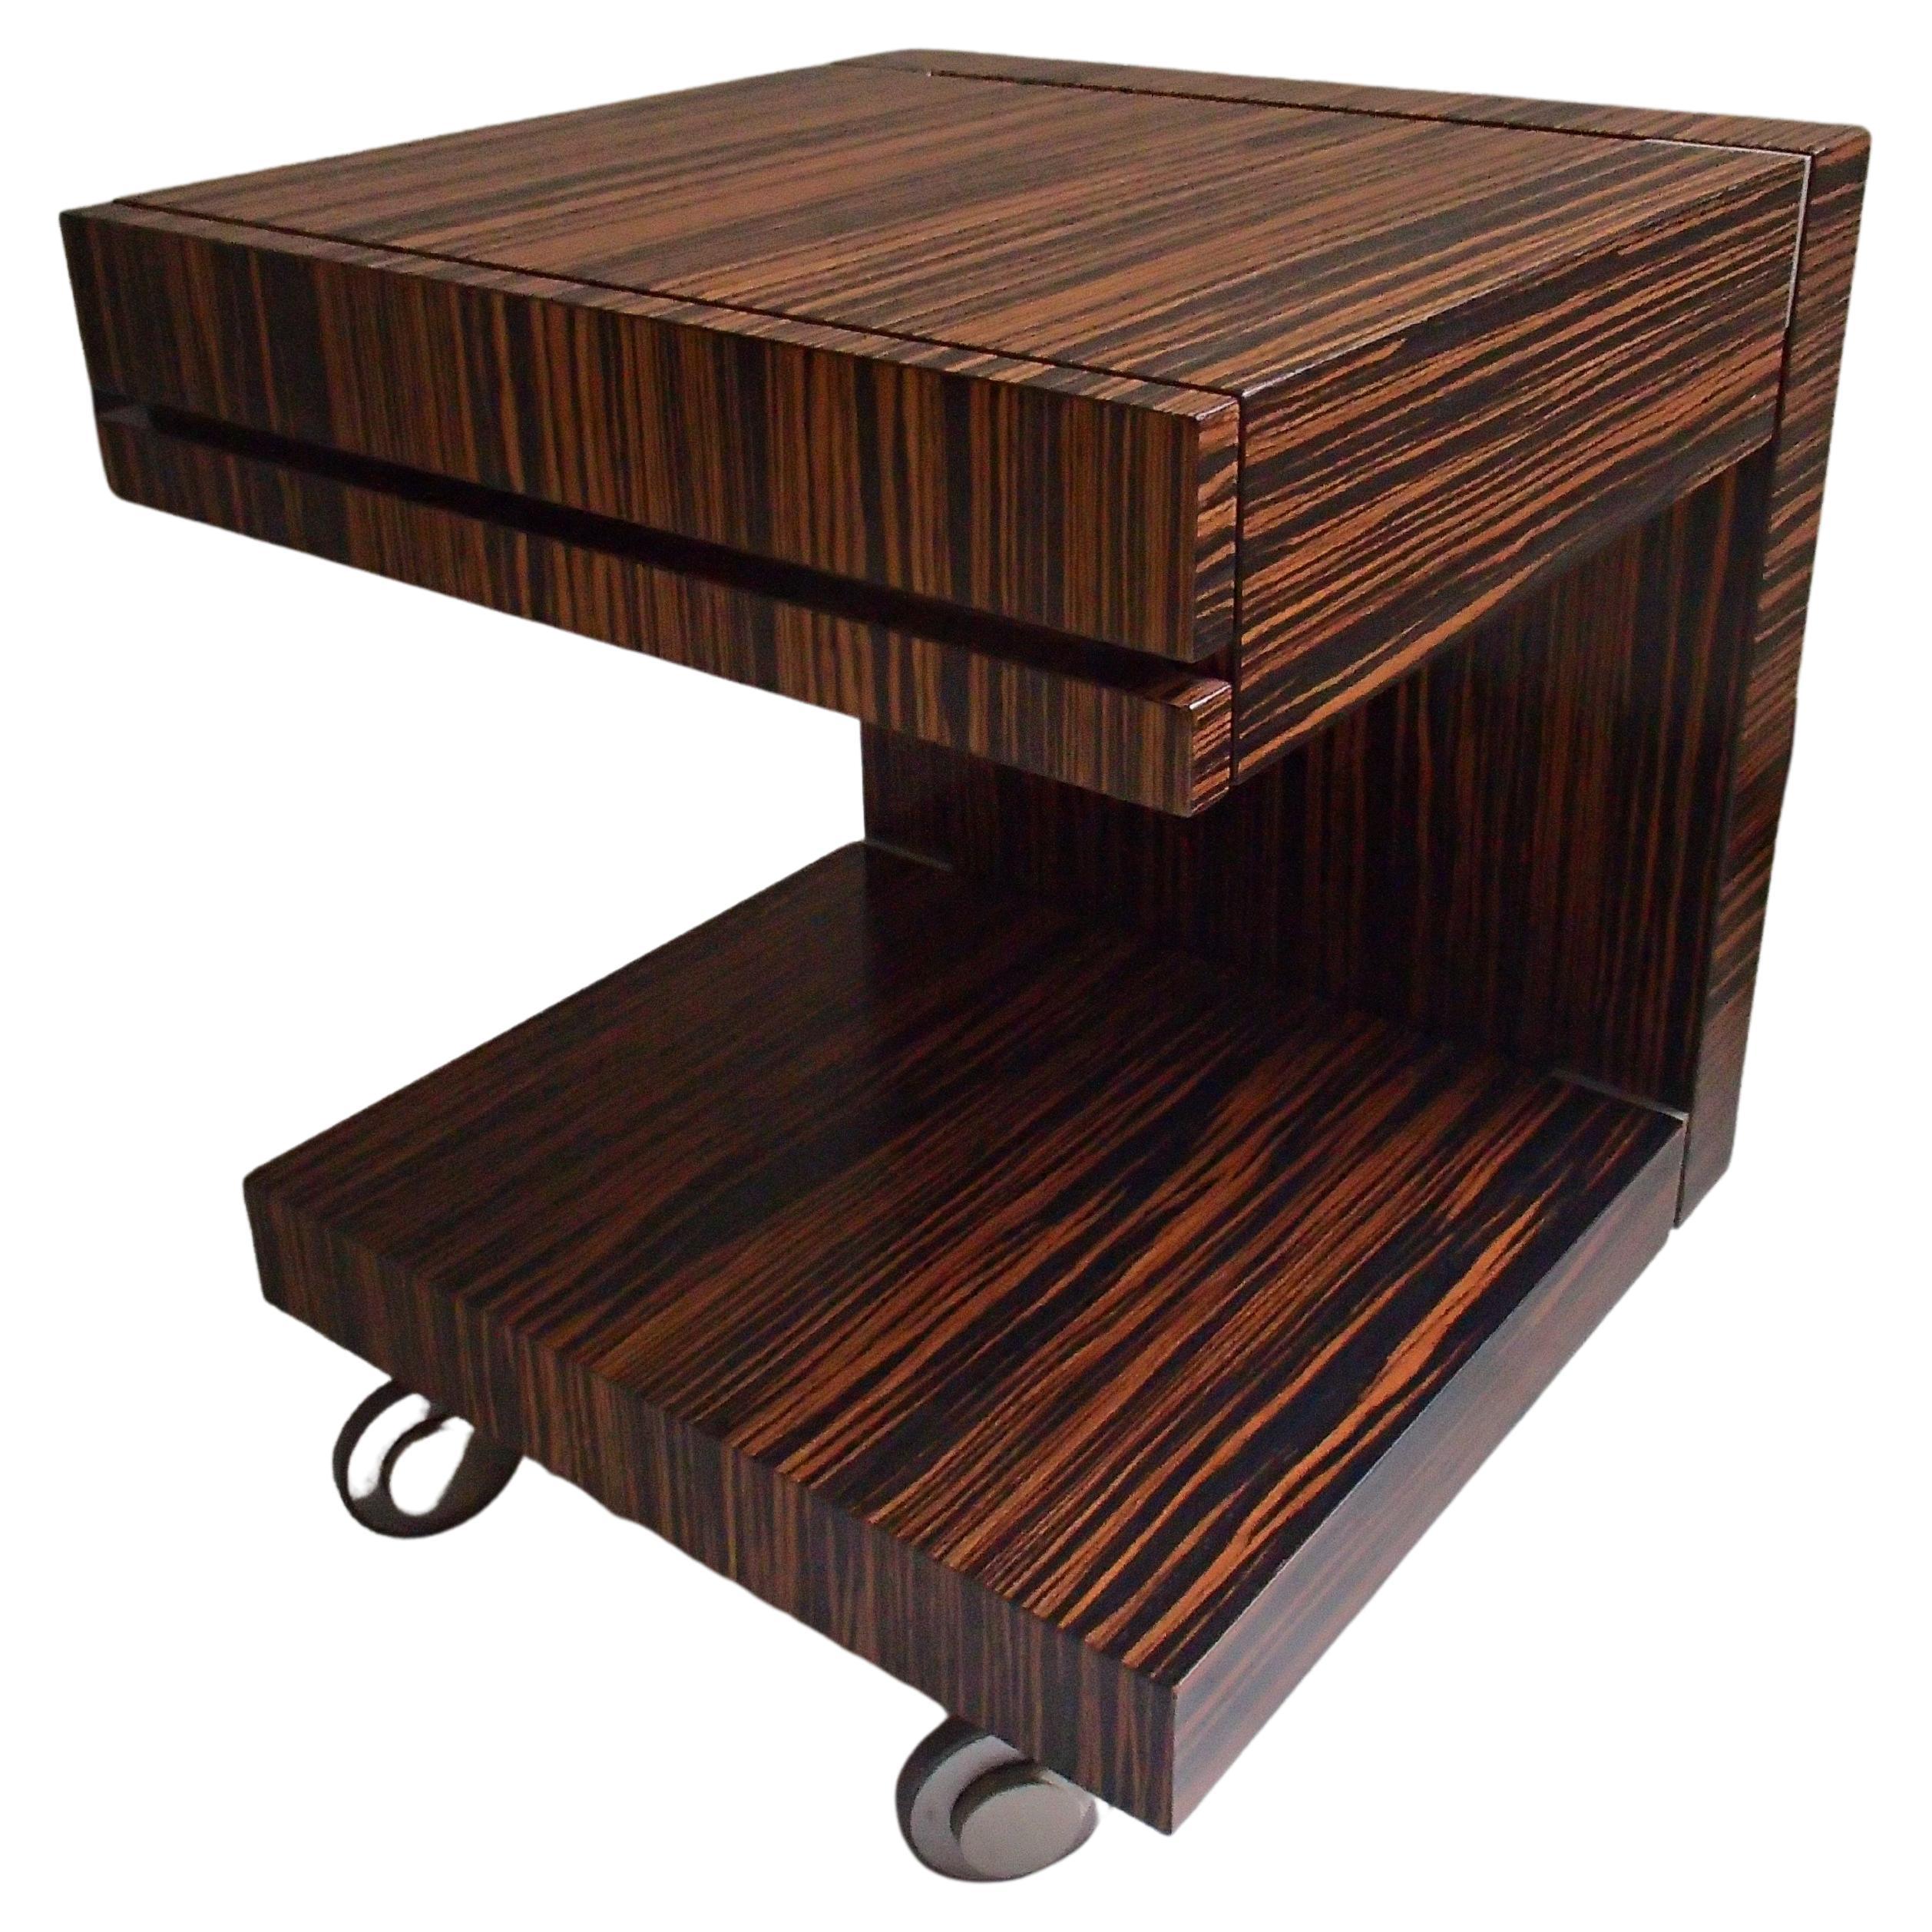 Modern Art Deco Ebene De Macassar Side Table or Nightstand with Drawer on Wheels For Sale